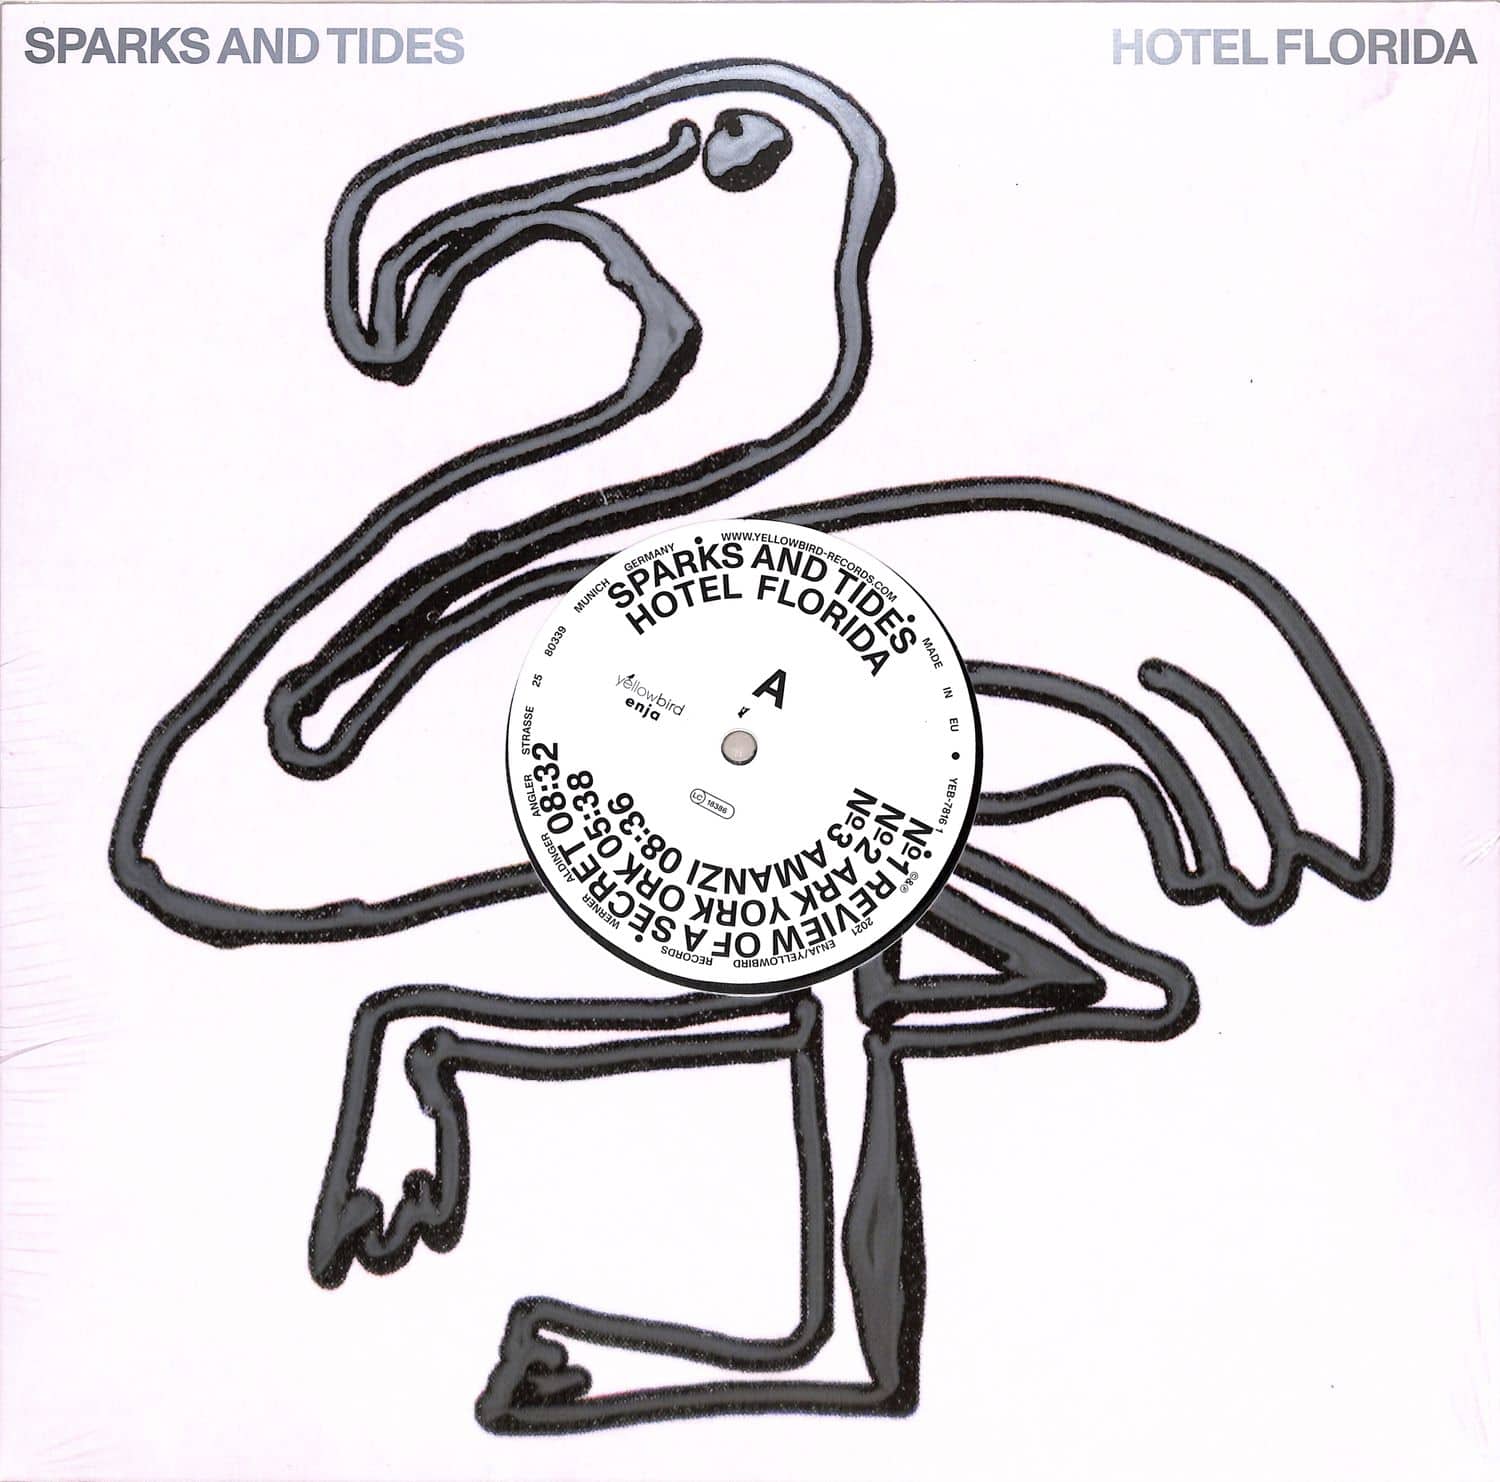 Sparks And Tides - HOTEL FLORIDA 